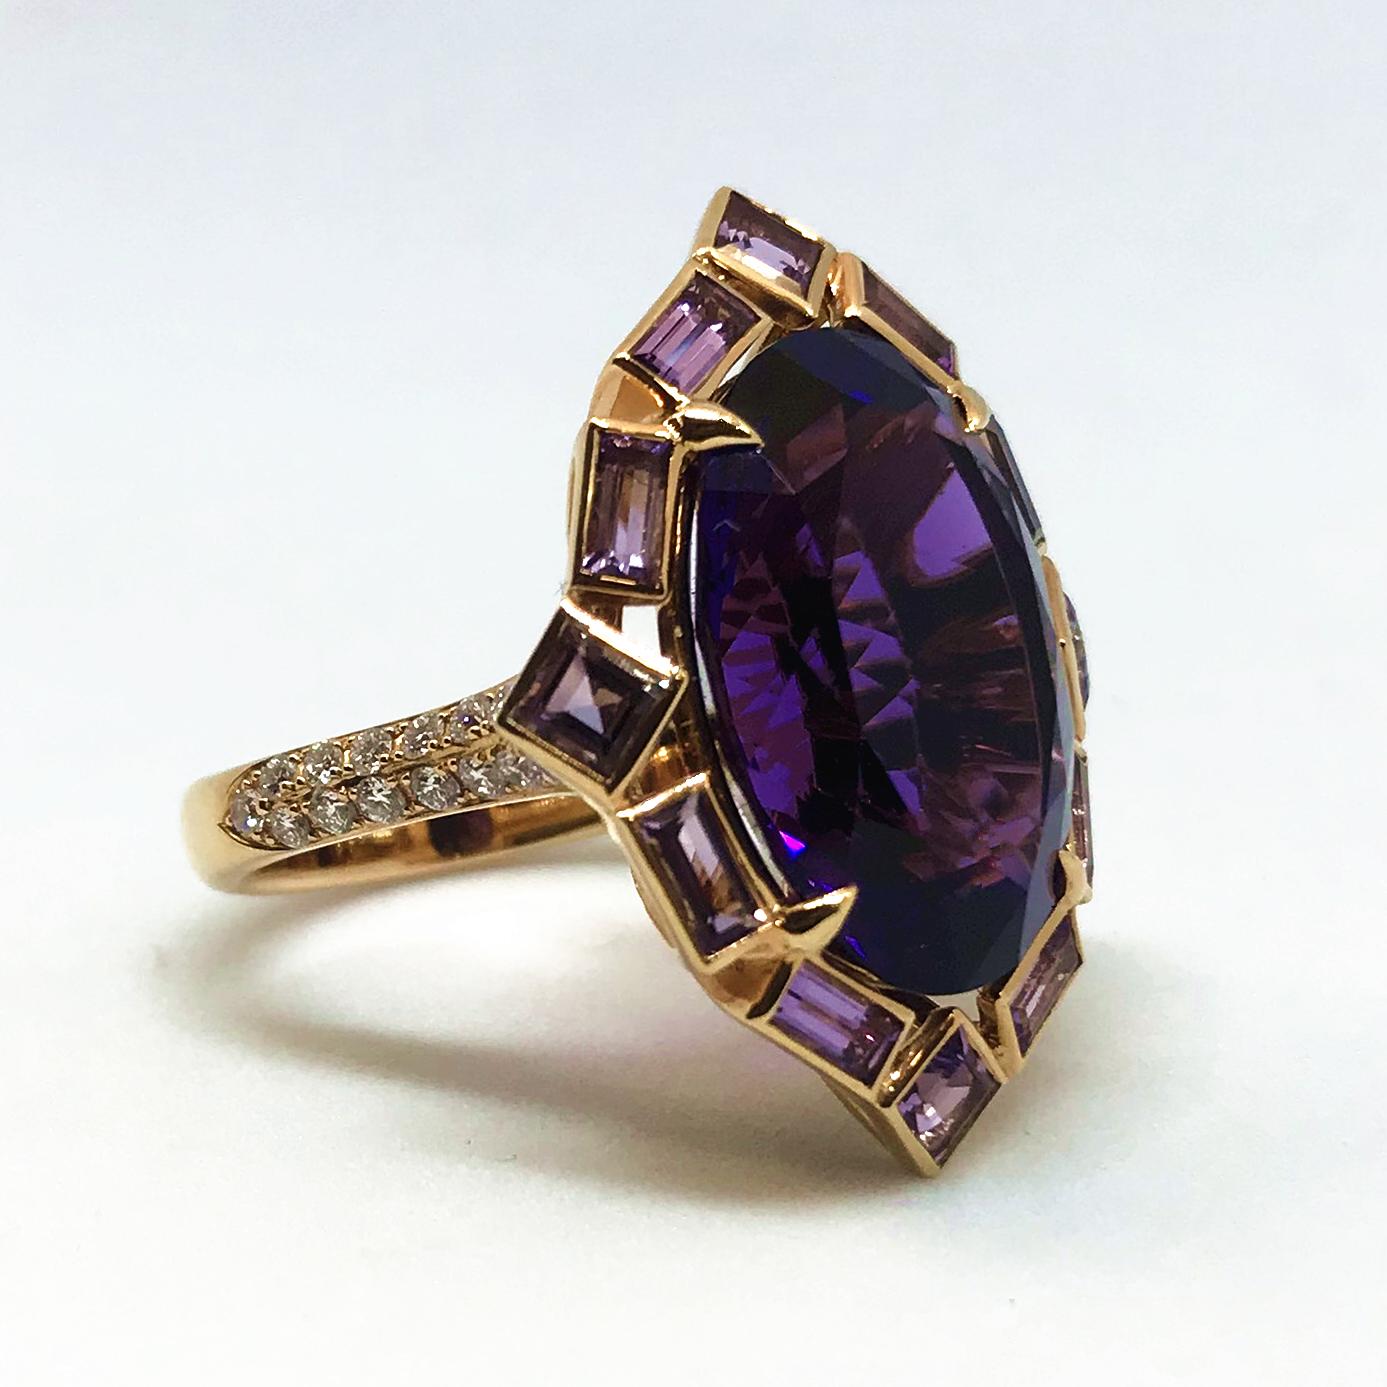 18K rose gold ring centering one oval-cut, faceted purple amethyst held with four prongs and surrounded by individually bezel-set four square-cut and eight baguette-cut light pink amethysts. This centerpiece is mounted on a thin shank partially